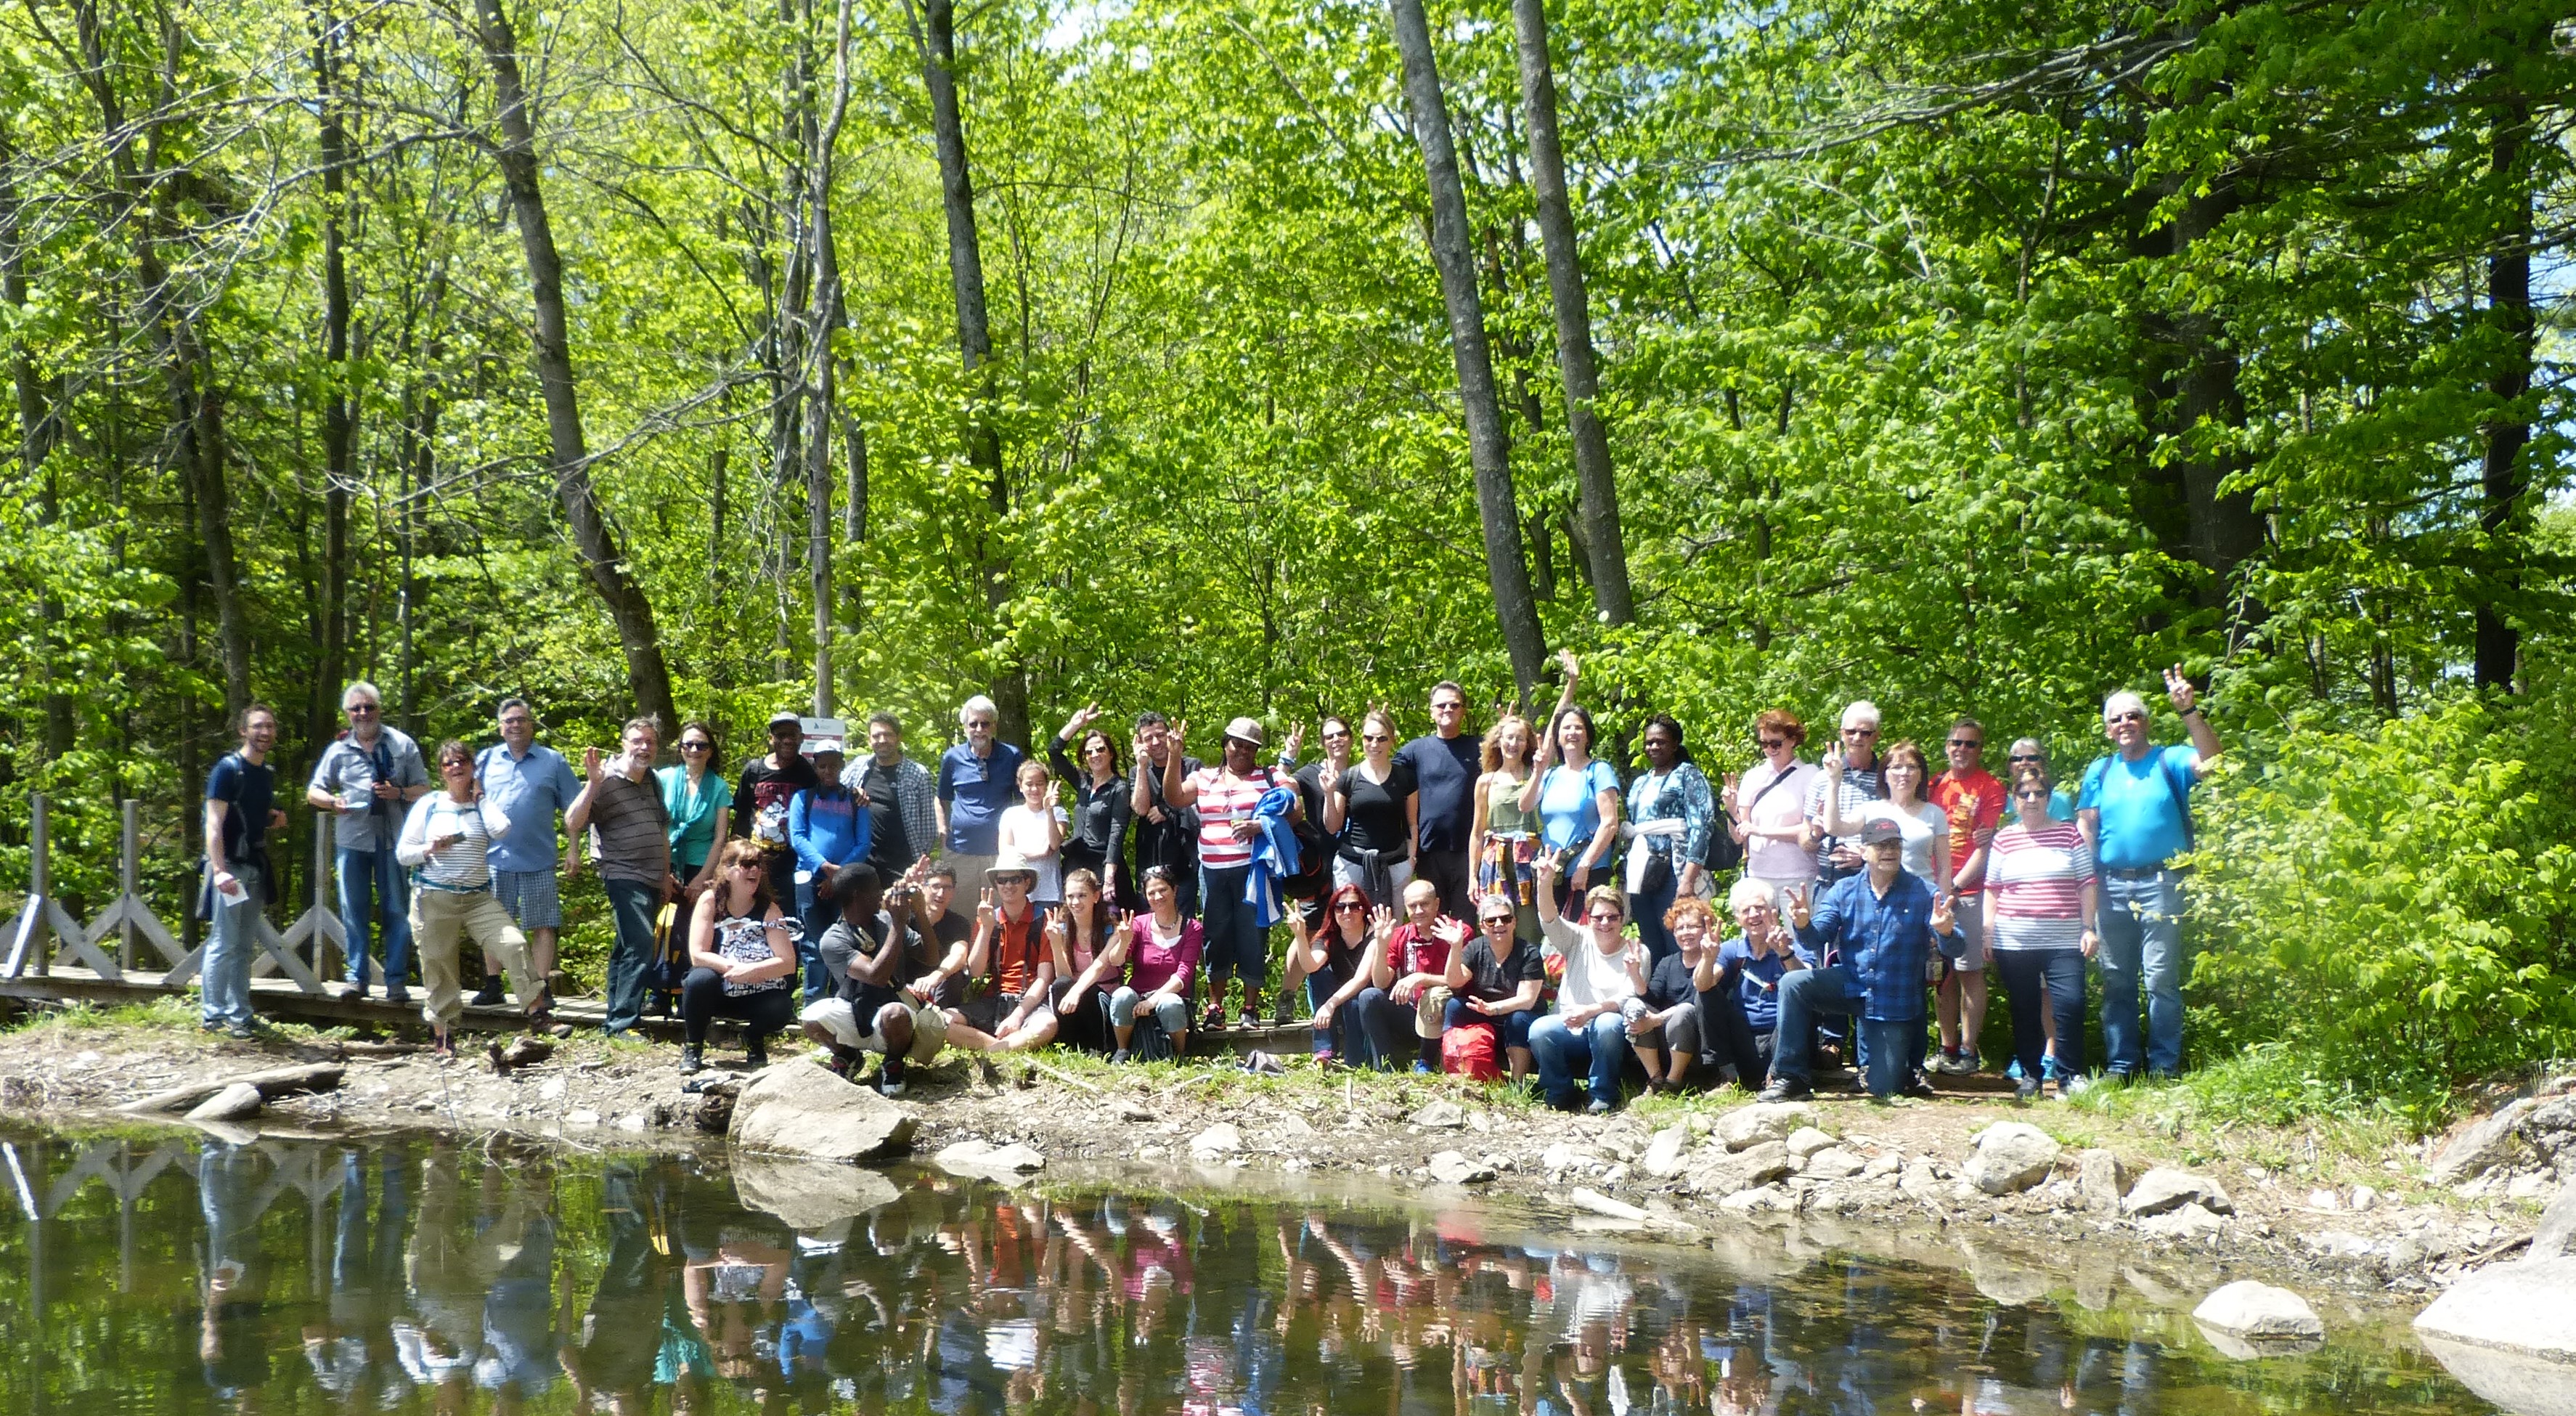 A group of people standing for a photo by water in a forest